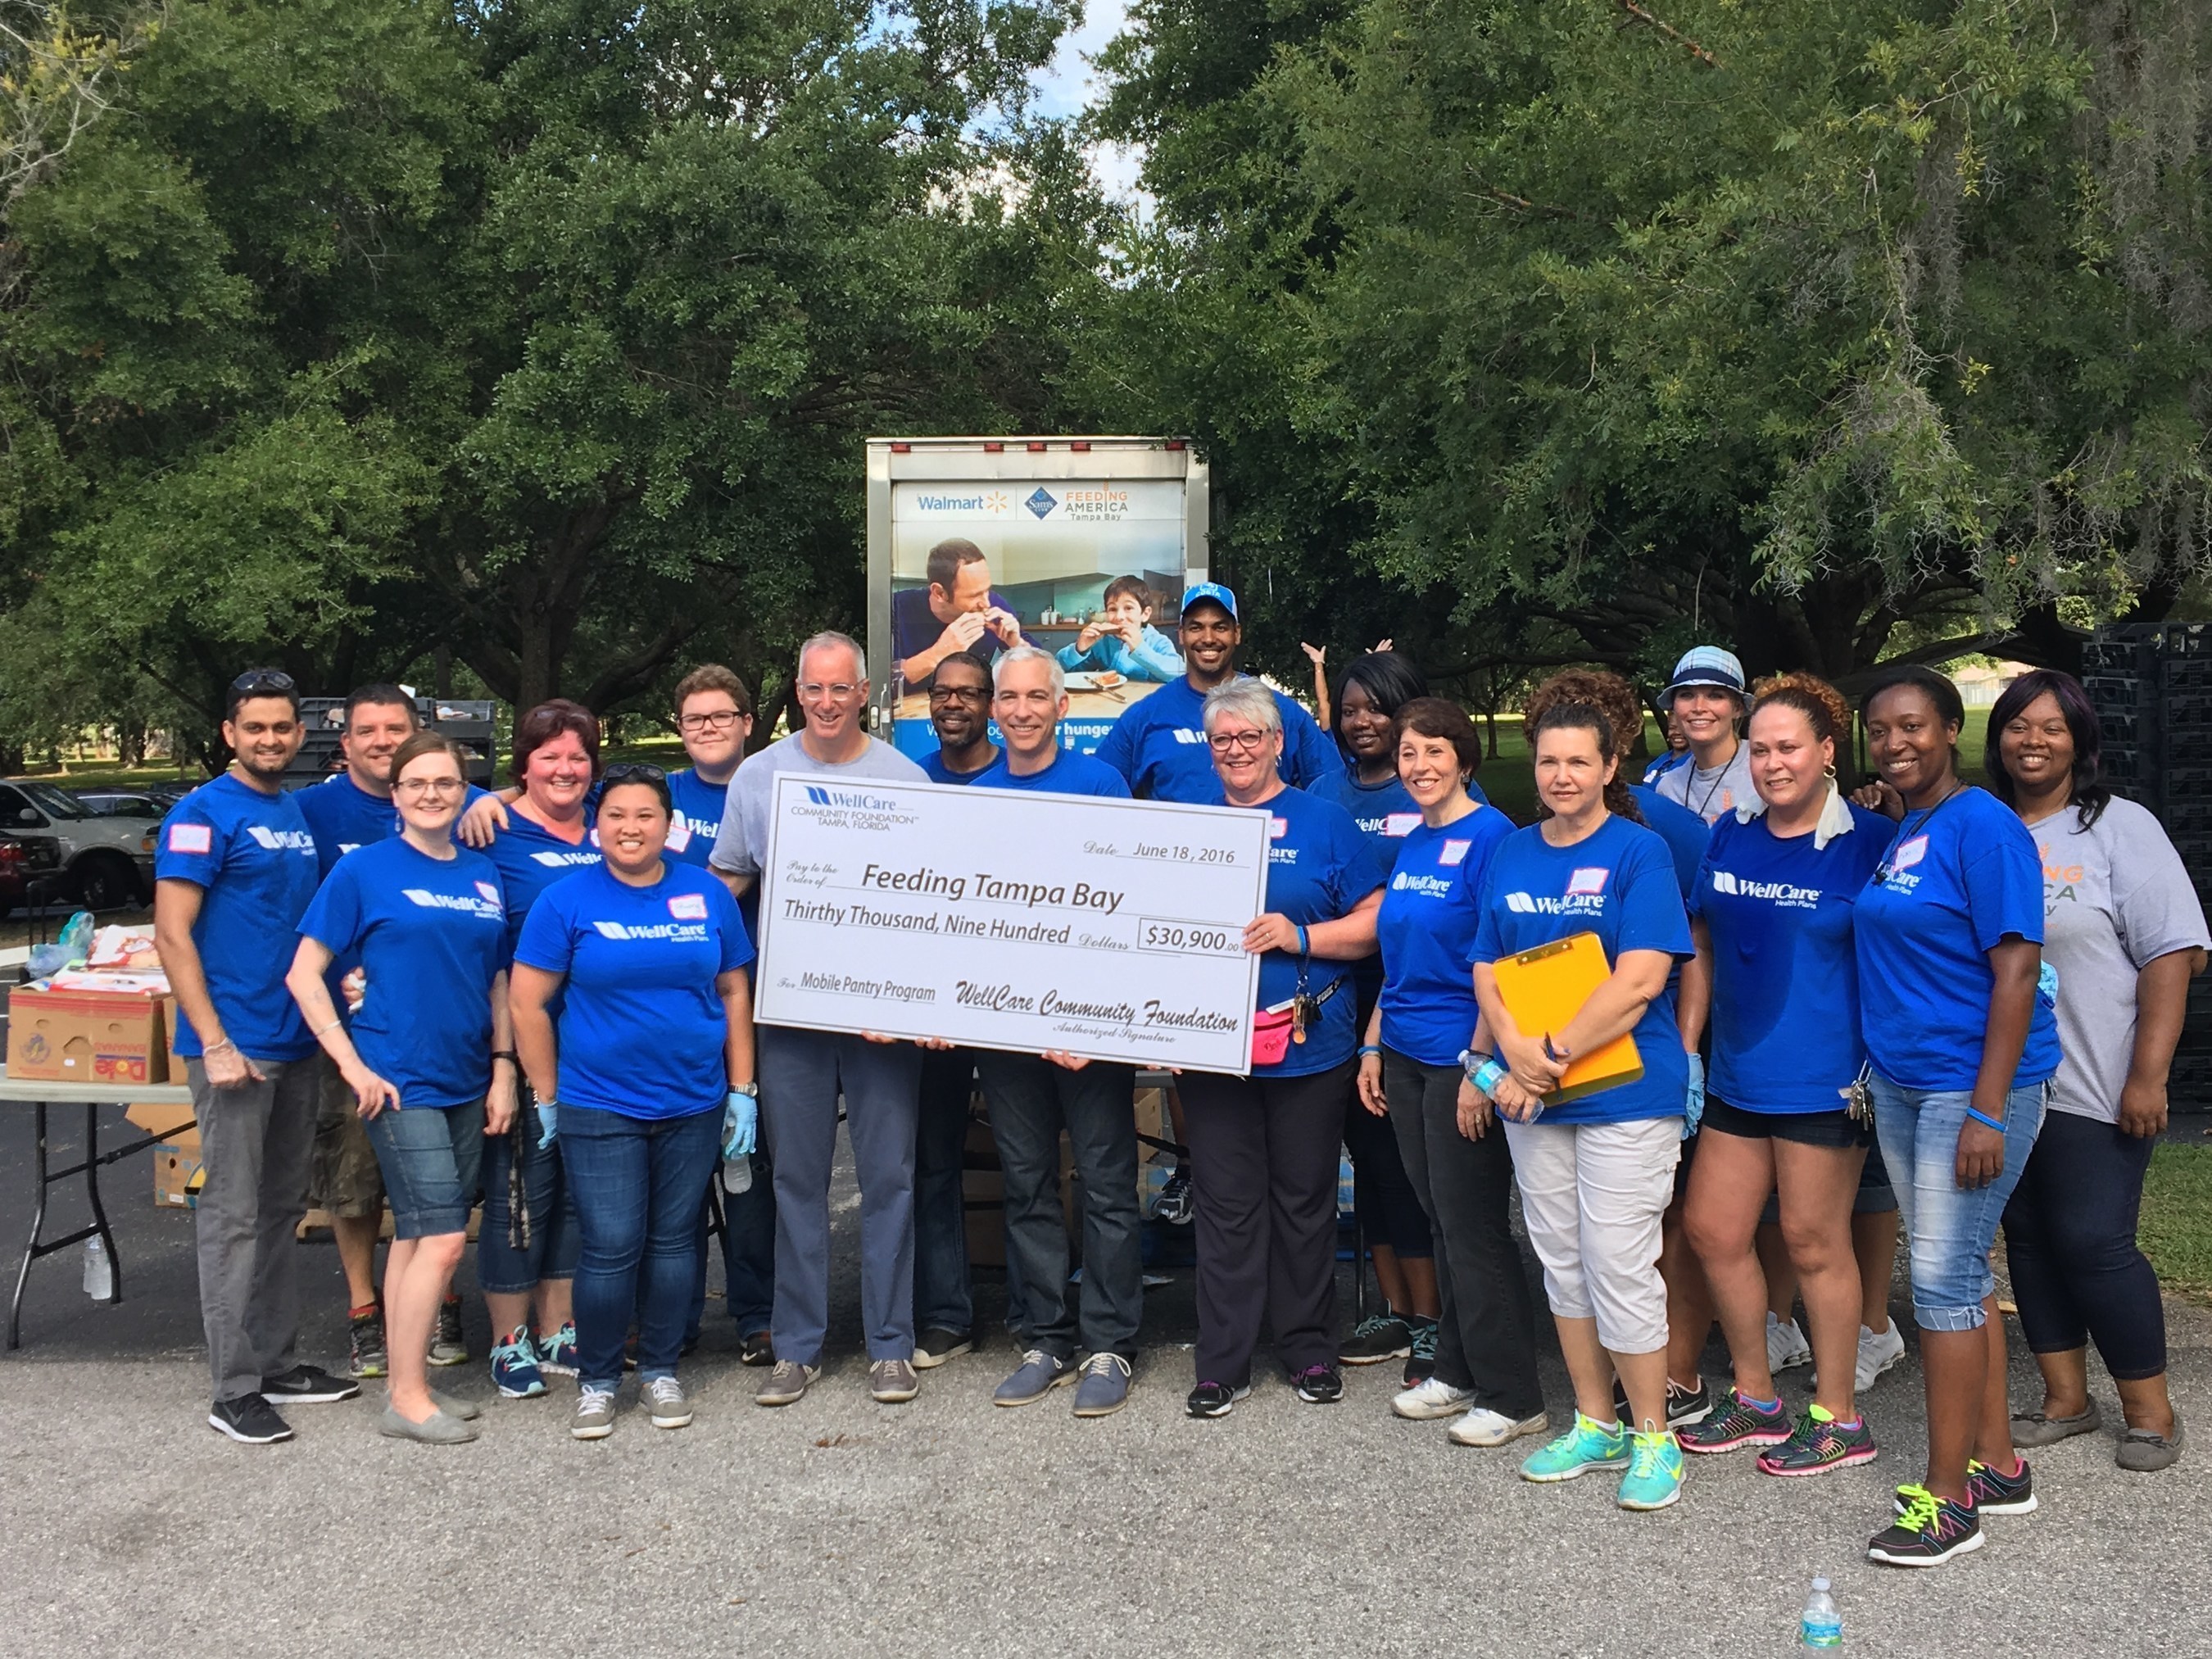 The WellCare Community Foundation donated more than $30,000 to Feeding Tampa Bay to support a 12-month mobile food pantry partnership, which will help feed children and families around Tampa Bay.